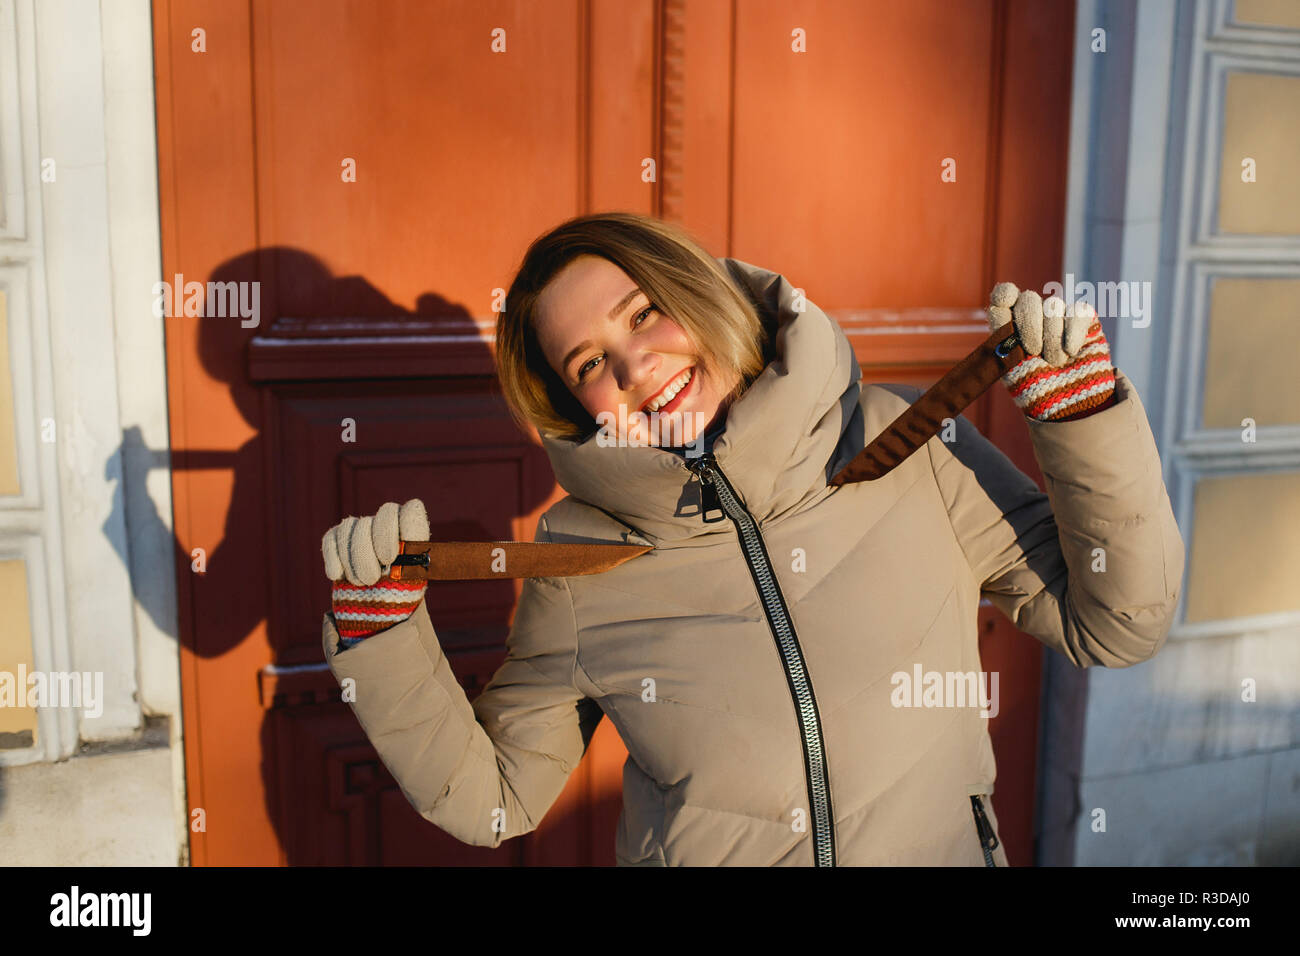 Playful stylish girl enjoying winter walk on a frosty sunny day. Concept of smile and good mood. Stock Photo